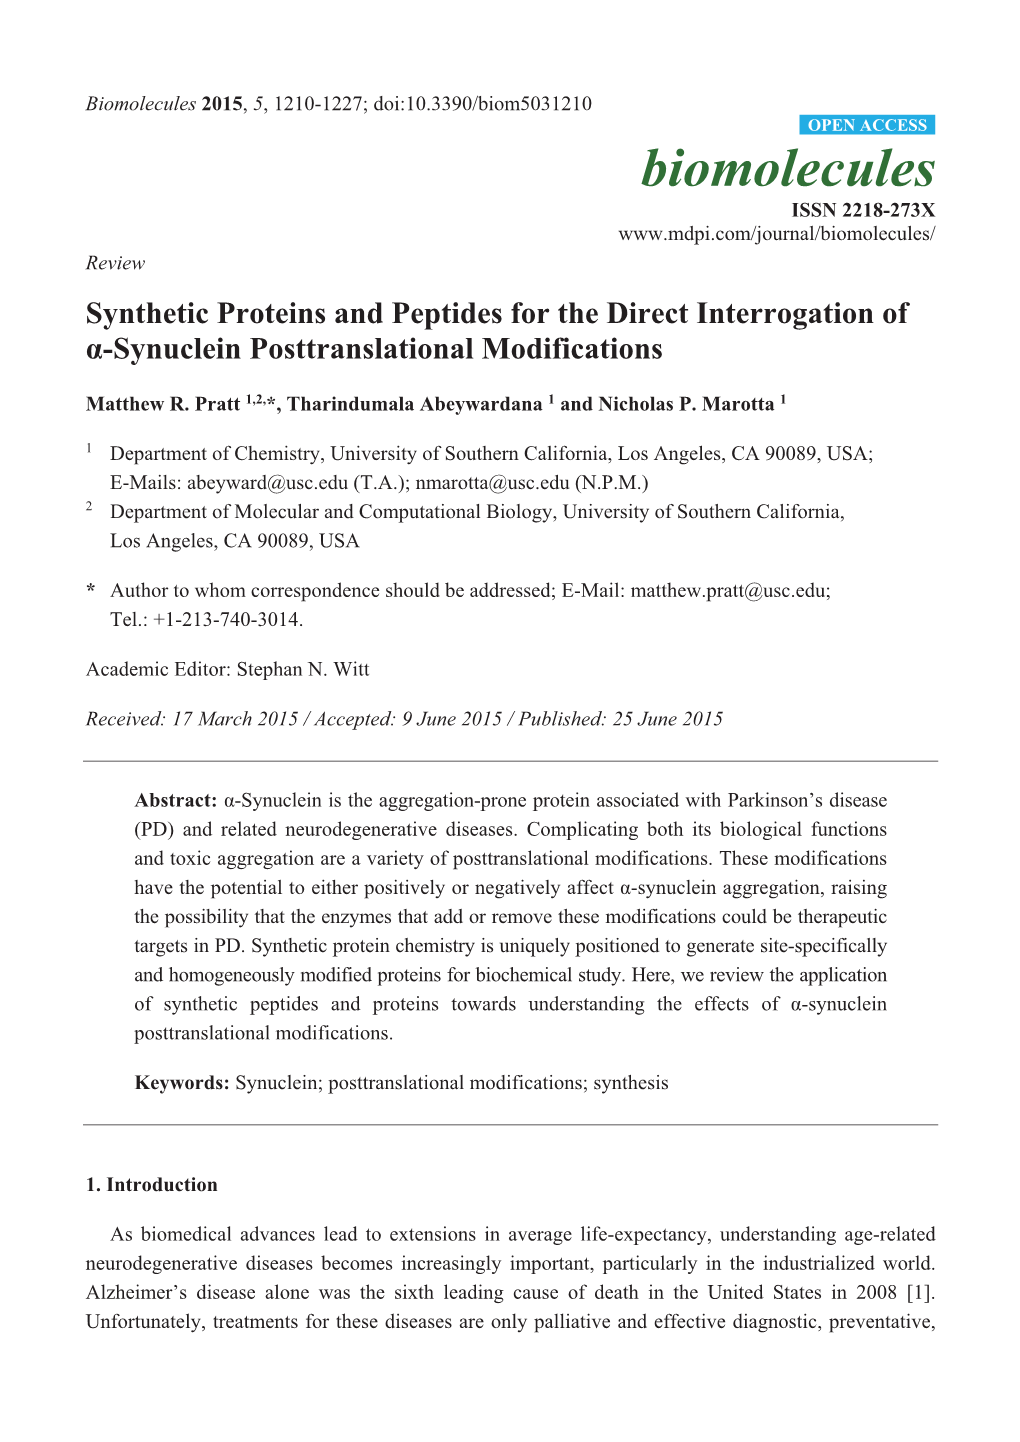 Synthetic Proteins and Peptides for the Direct Interrogation of Α